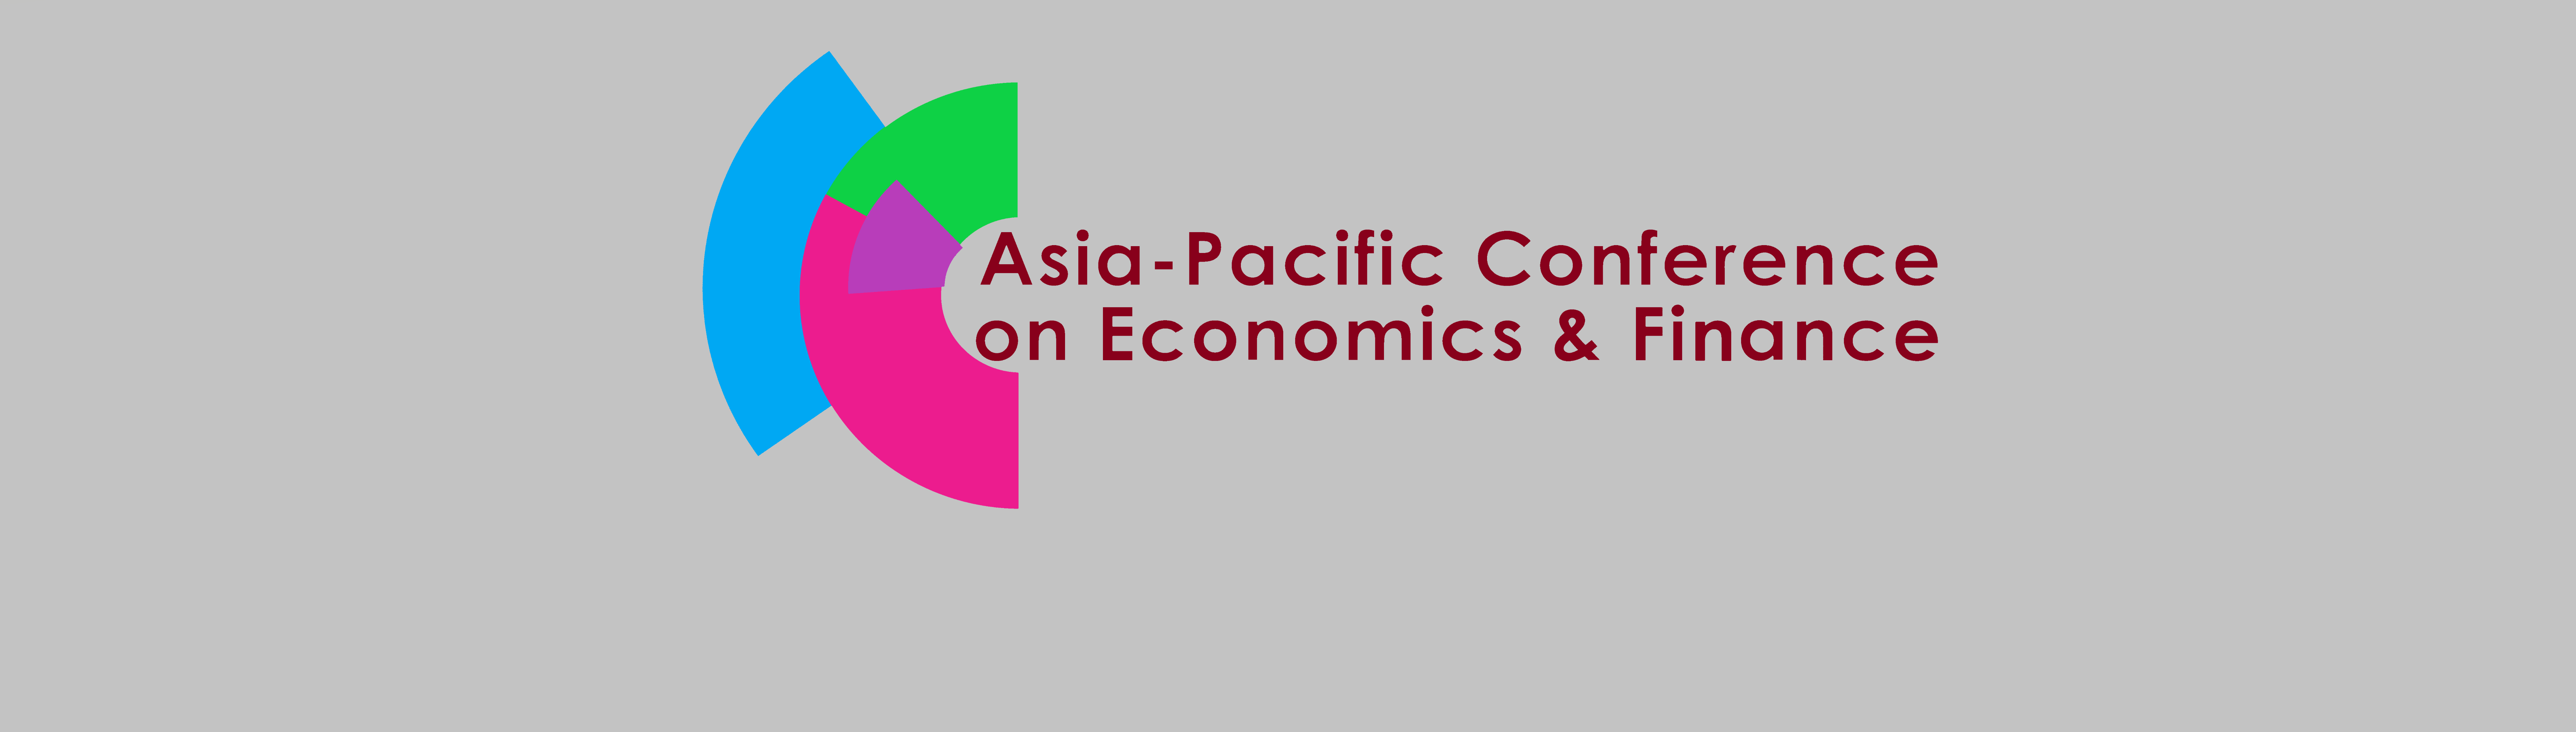 2019 Asia-Pacific Conference on Economics & Finance (APEF 2019), Havelock Road, Central, Singapore